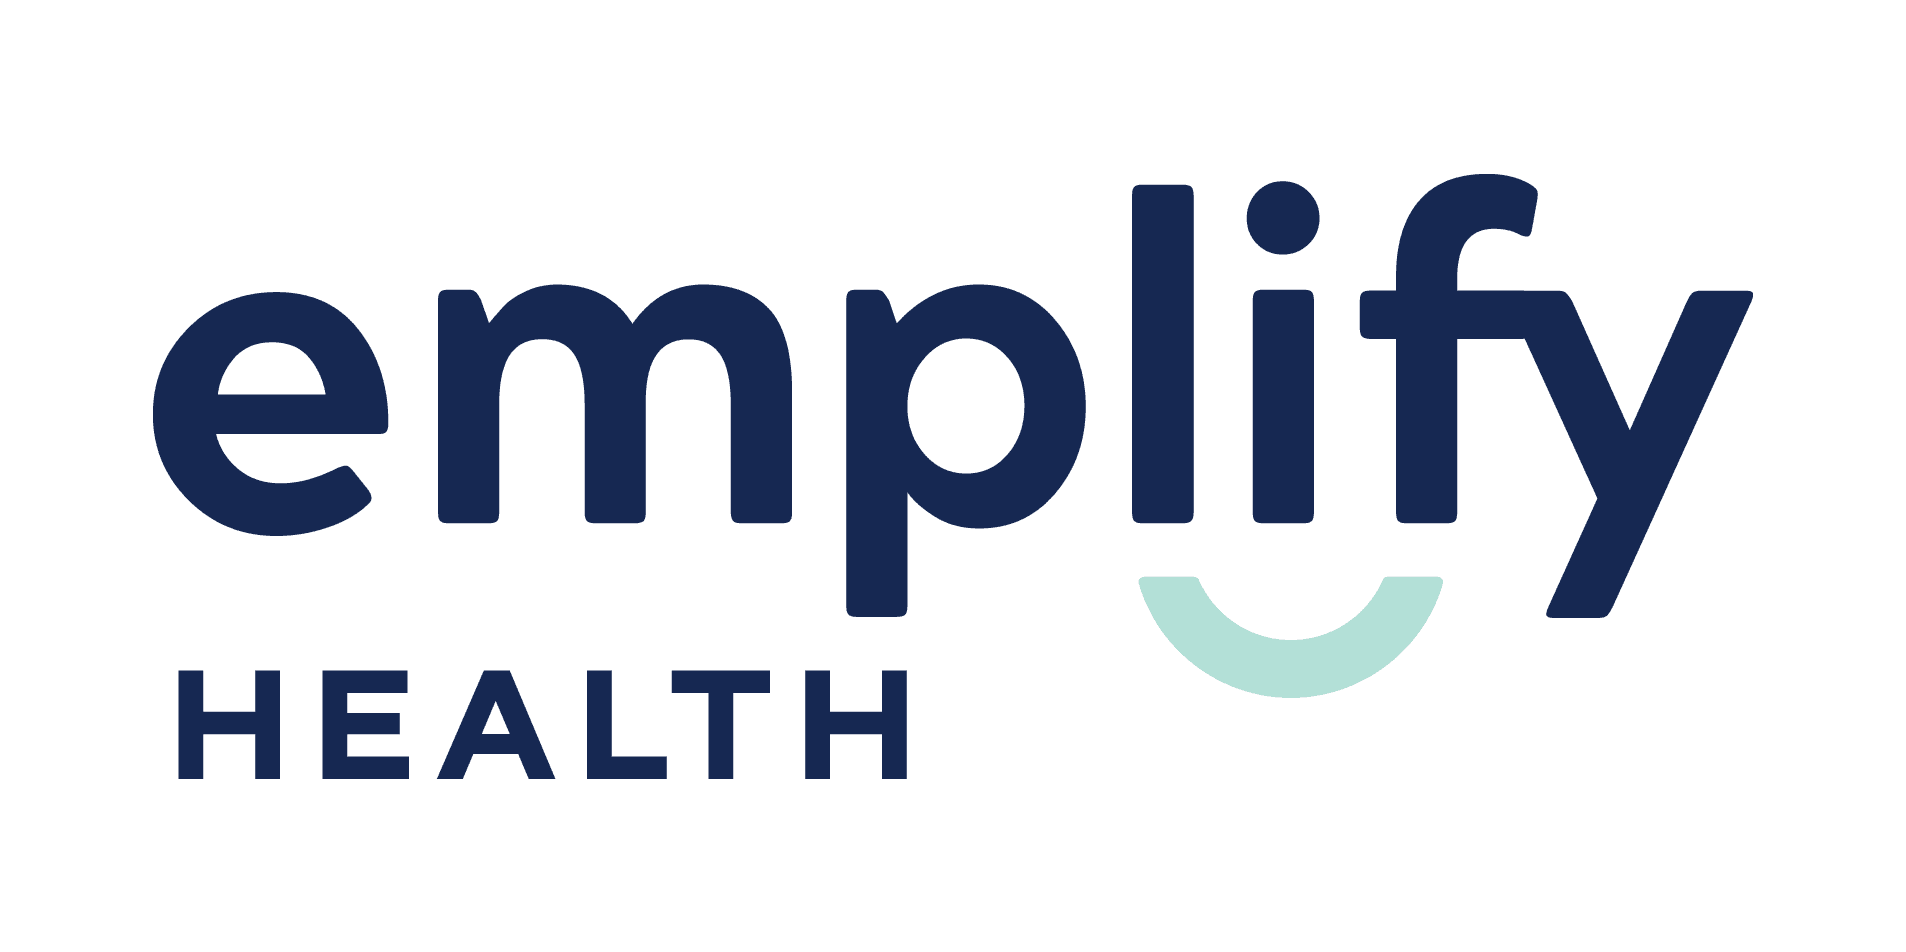 Image of the Emplify Health logo.